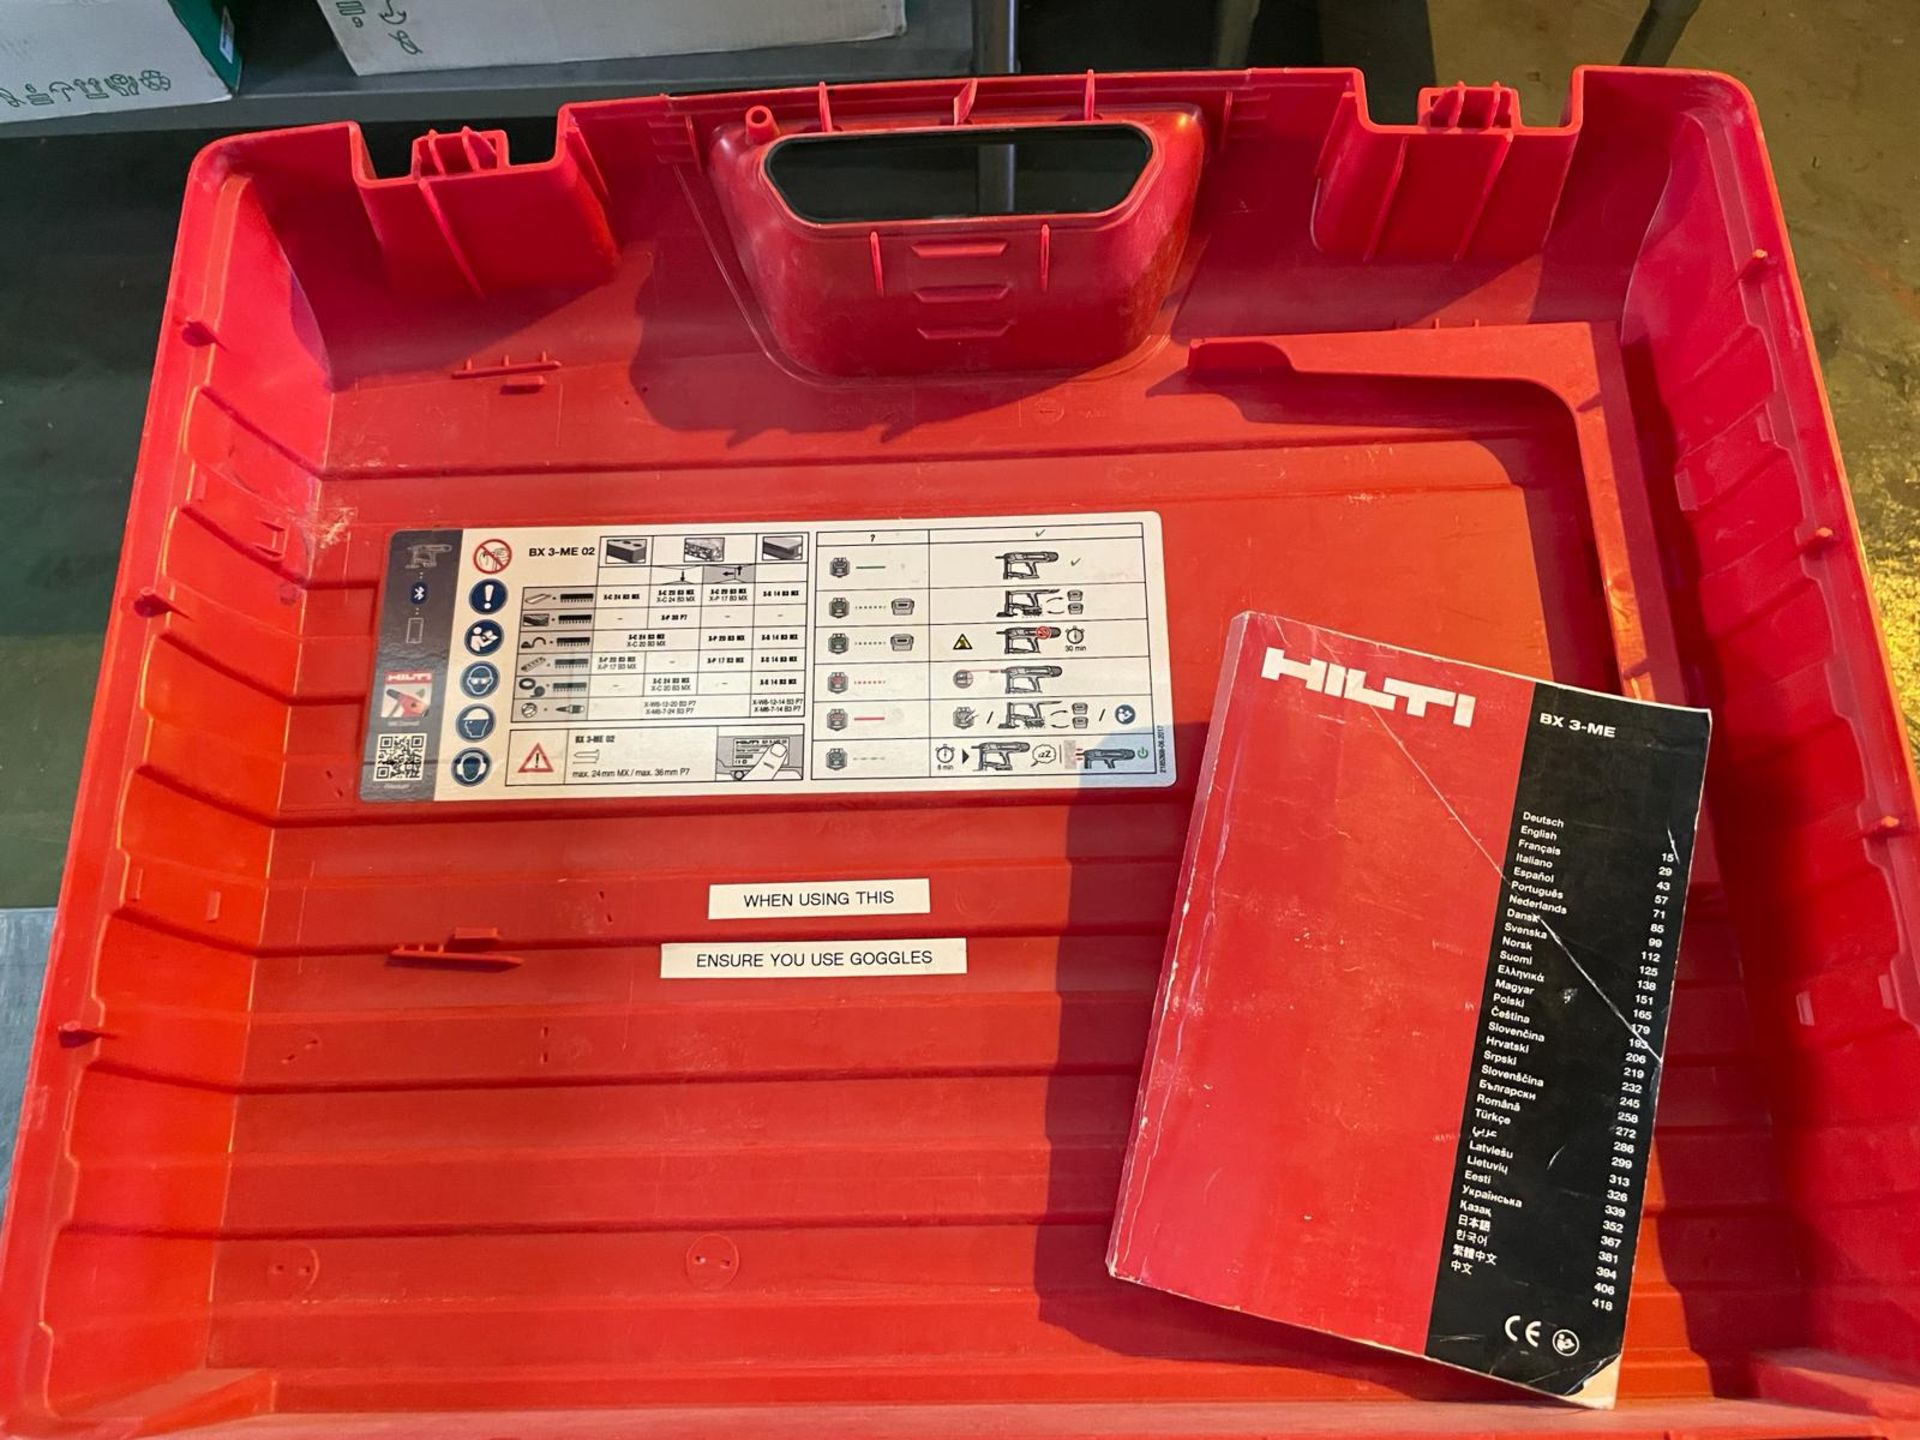 1 x Hilti BX3 Cordless Nail Gun Fastening Tool - Includes Case, Battery and Charger - RRP £3,400 - Bild 5 aus 7